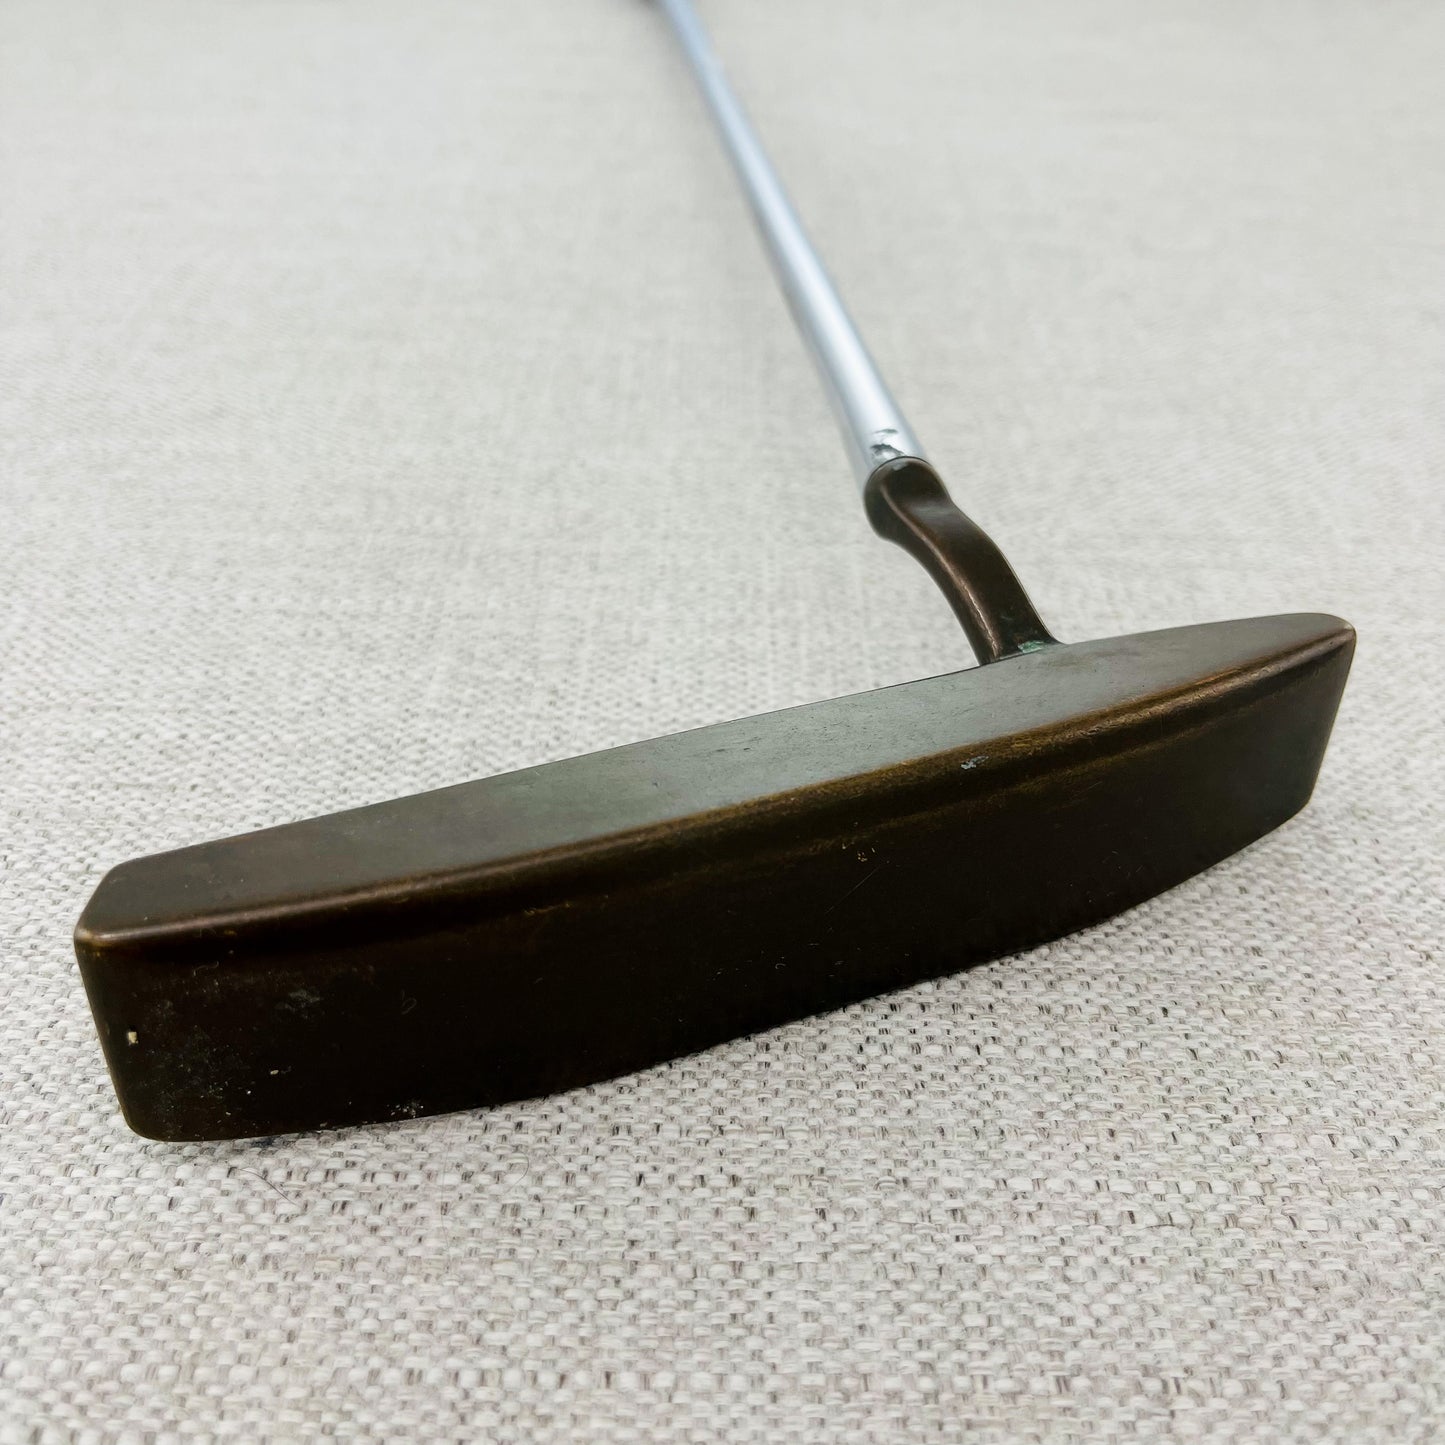 PING Pal 6 Beryllium Copper (BeCu) Putter. 34 inch - Very Good Condition # T905